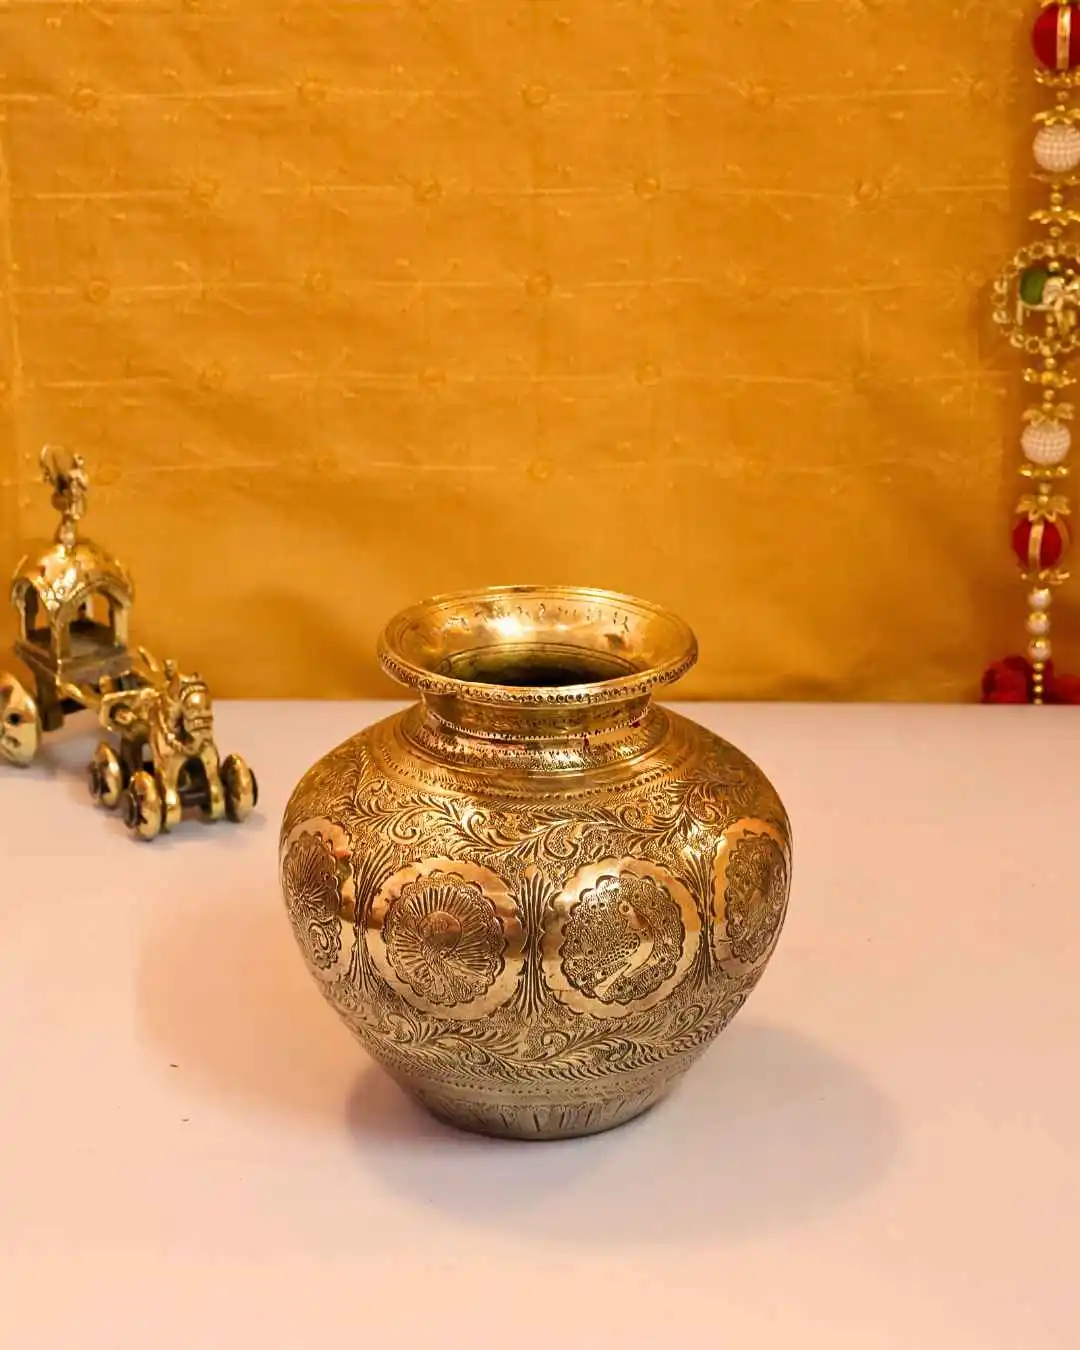 Vintage lota, vintage 9 figure pot, royal brass pot, rare brass pot, brass antique lota, vintage brass pot, old rare home decor, vintage gift, old rare gift, brass vintage gift, decorative items, brass collectible, collectible items, old indian craft